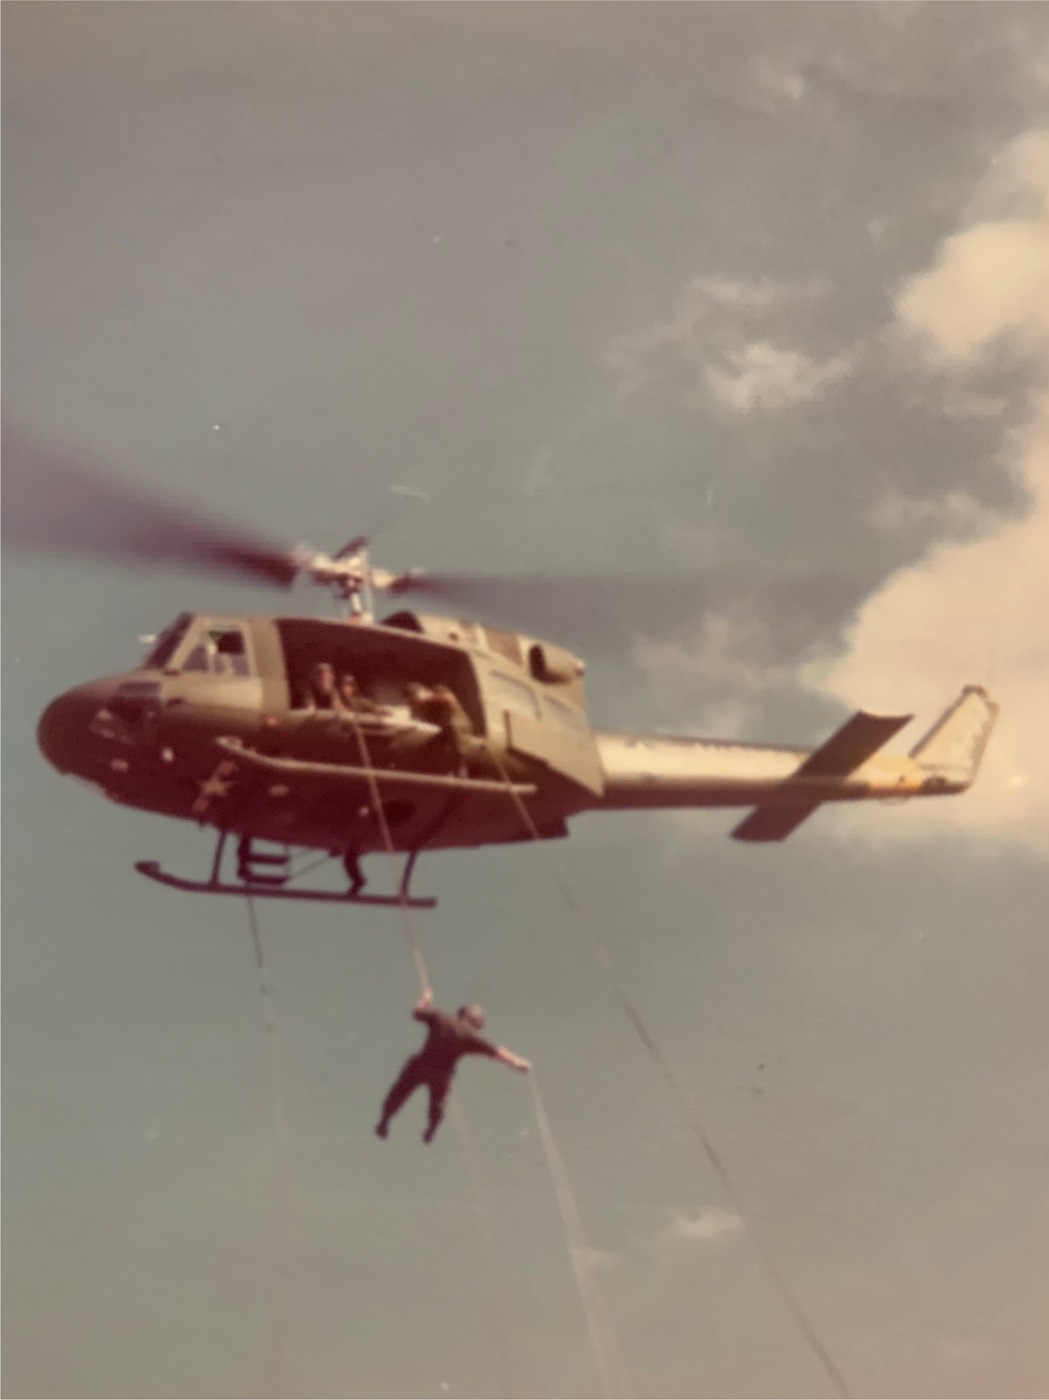 FBI SWAT rappelling from helicopter in 1974